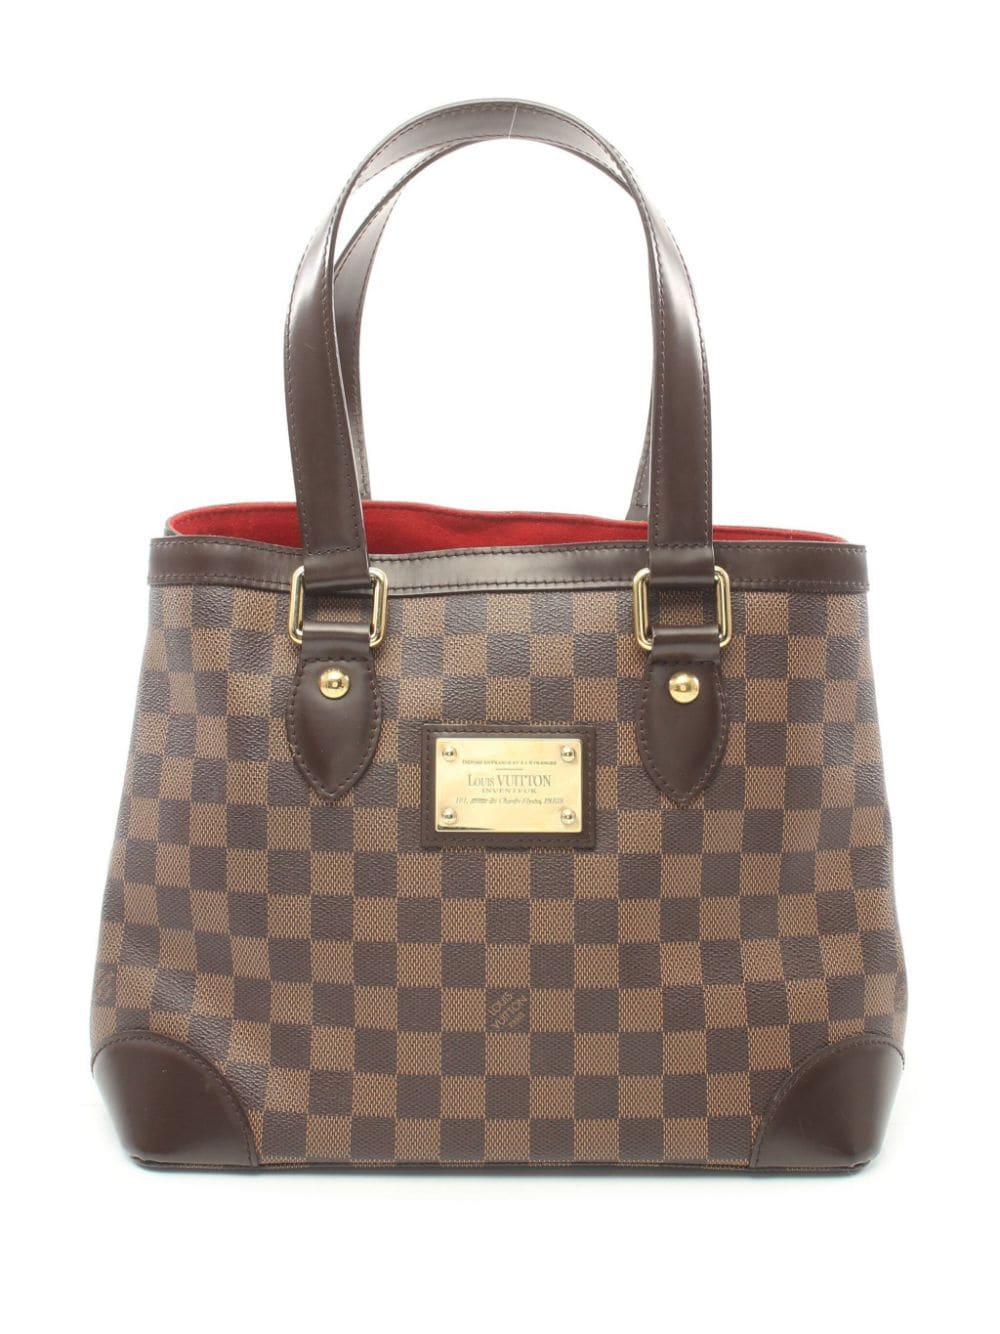 Pre-owned Louis Vuitton 2008 Hampstead Pm Tote Bag In Brown